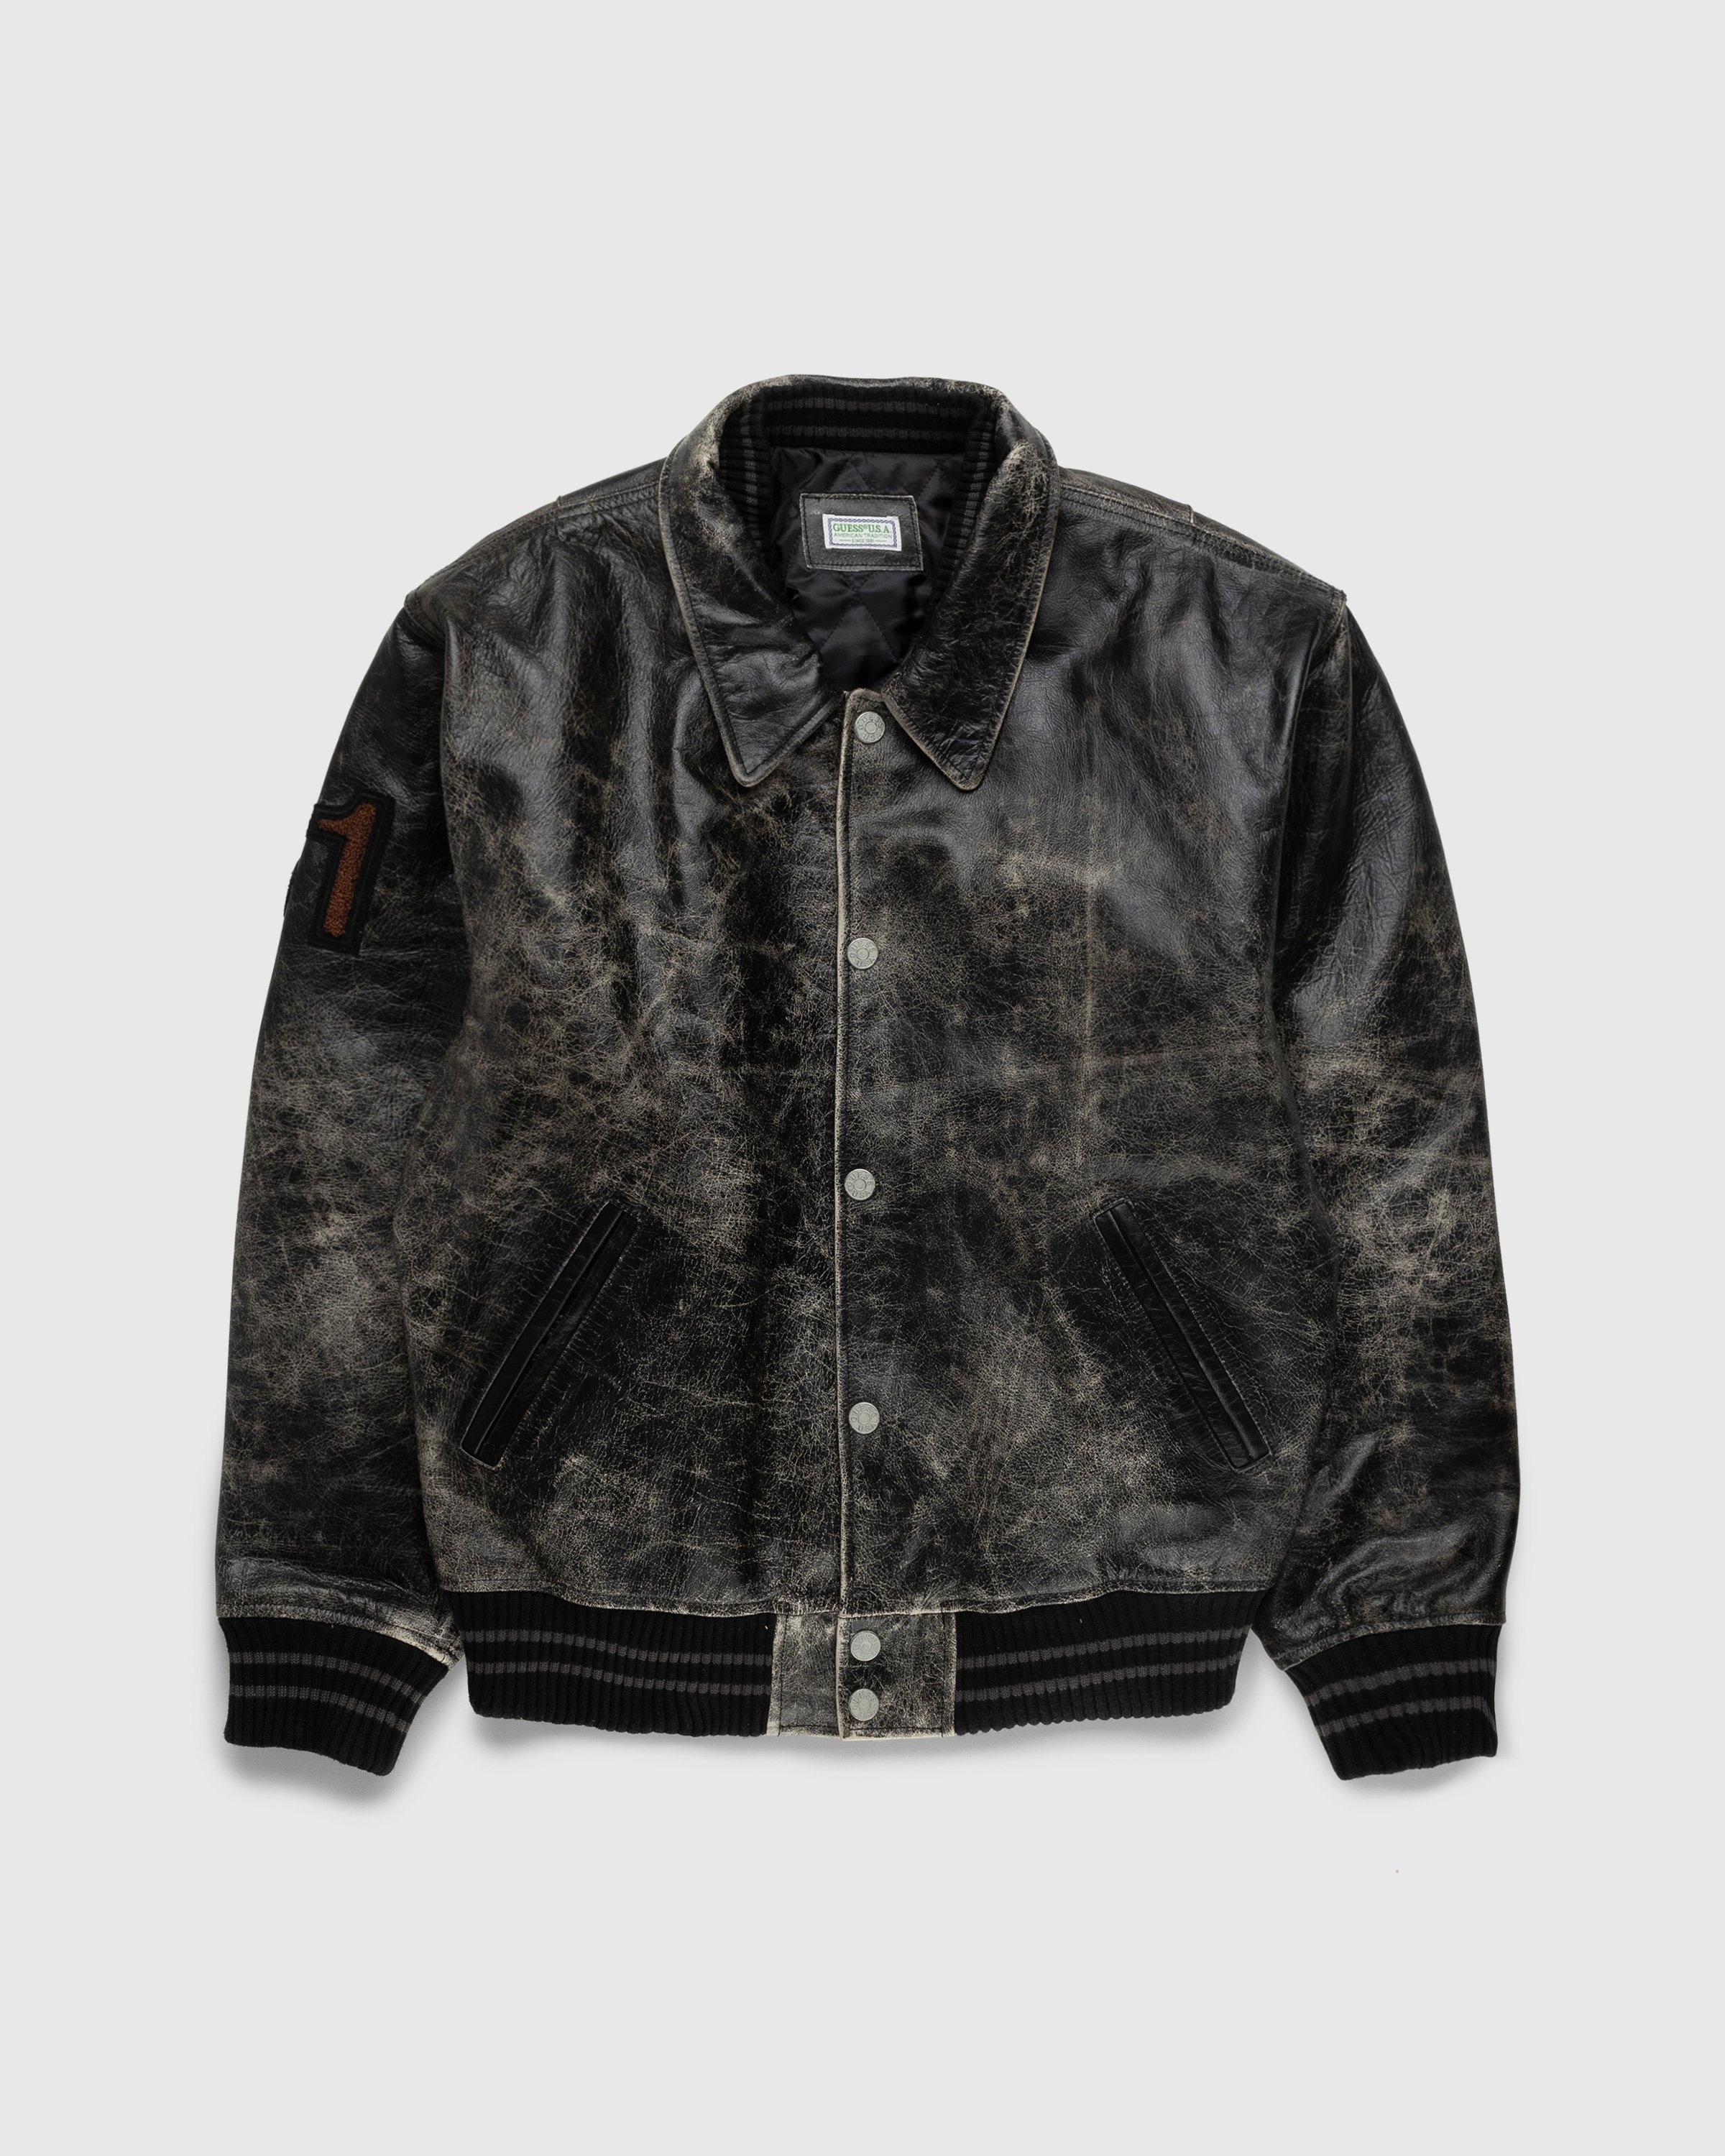 Guess USA – Distressed Leather Letterman Jacket Black | Highsnobiety Shop